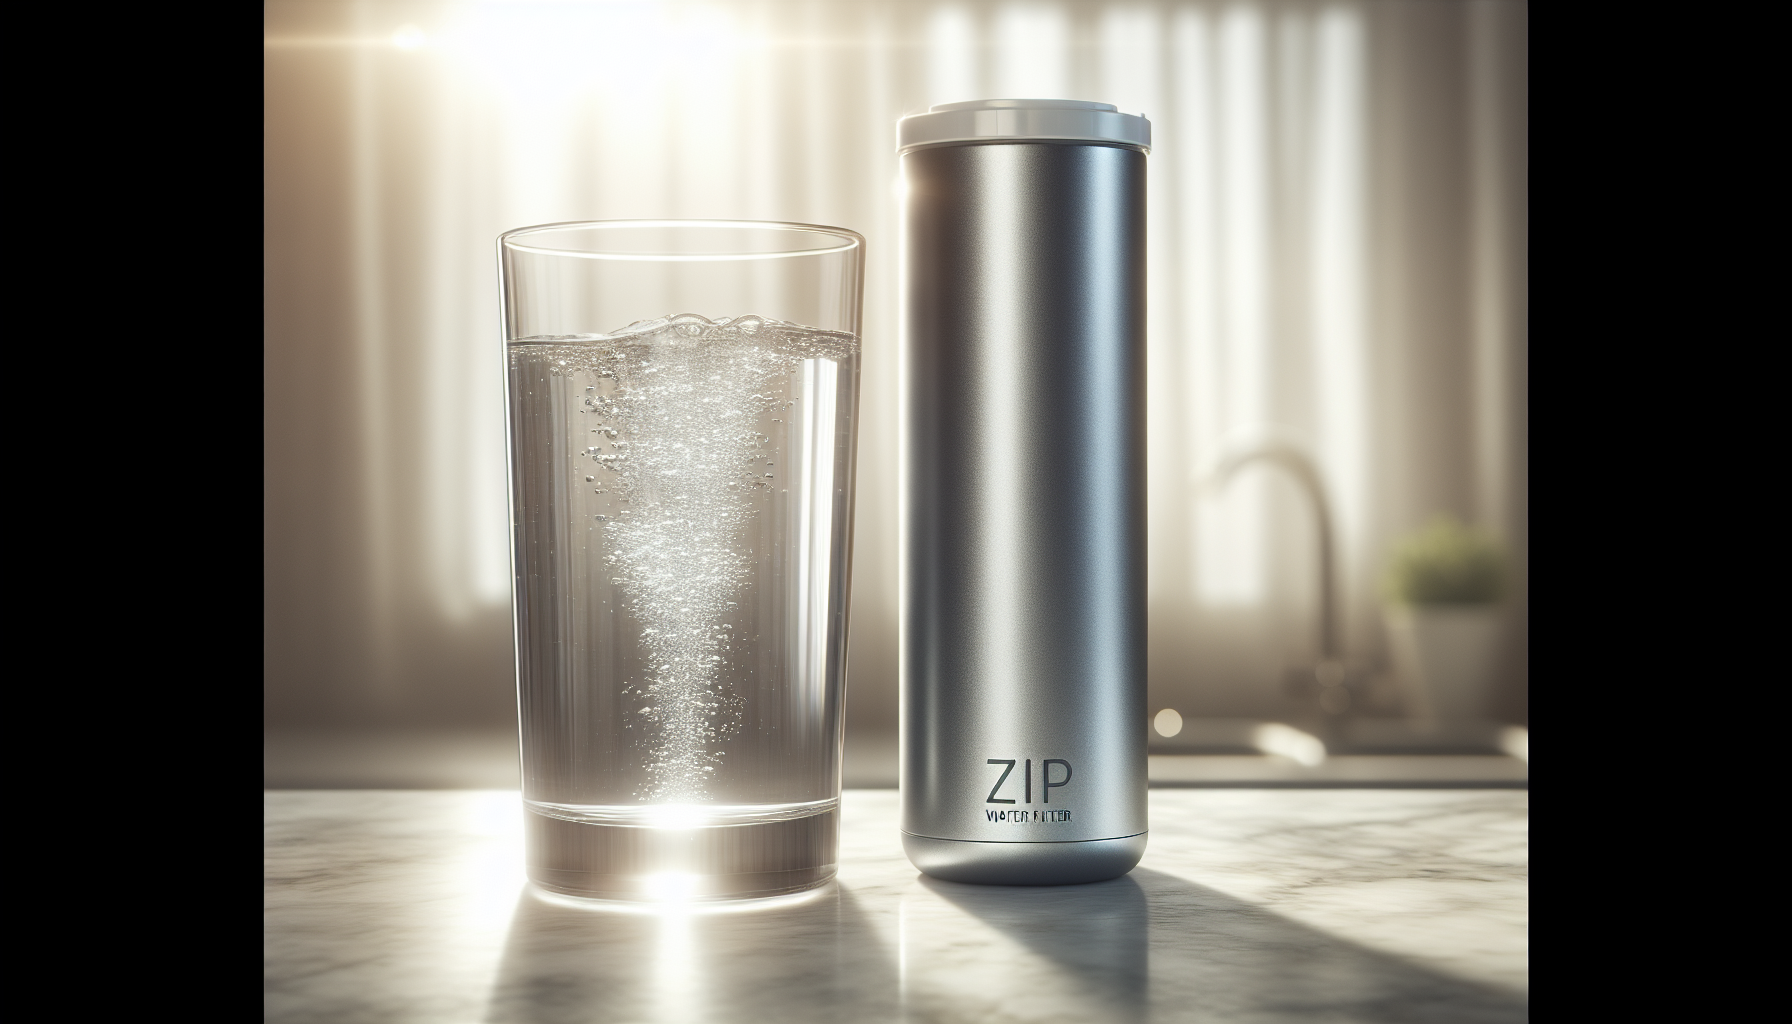 Zip water filter cartridge and glass of pure tasting water